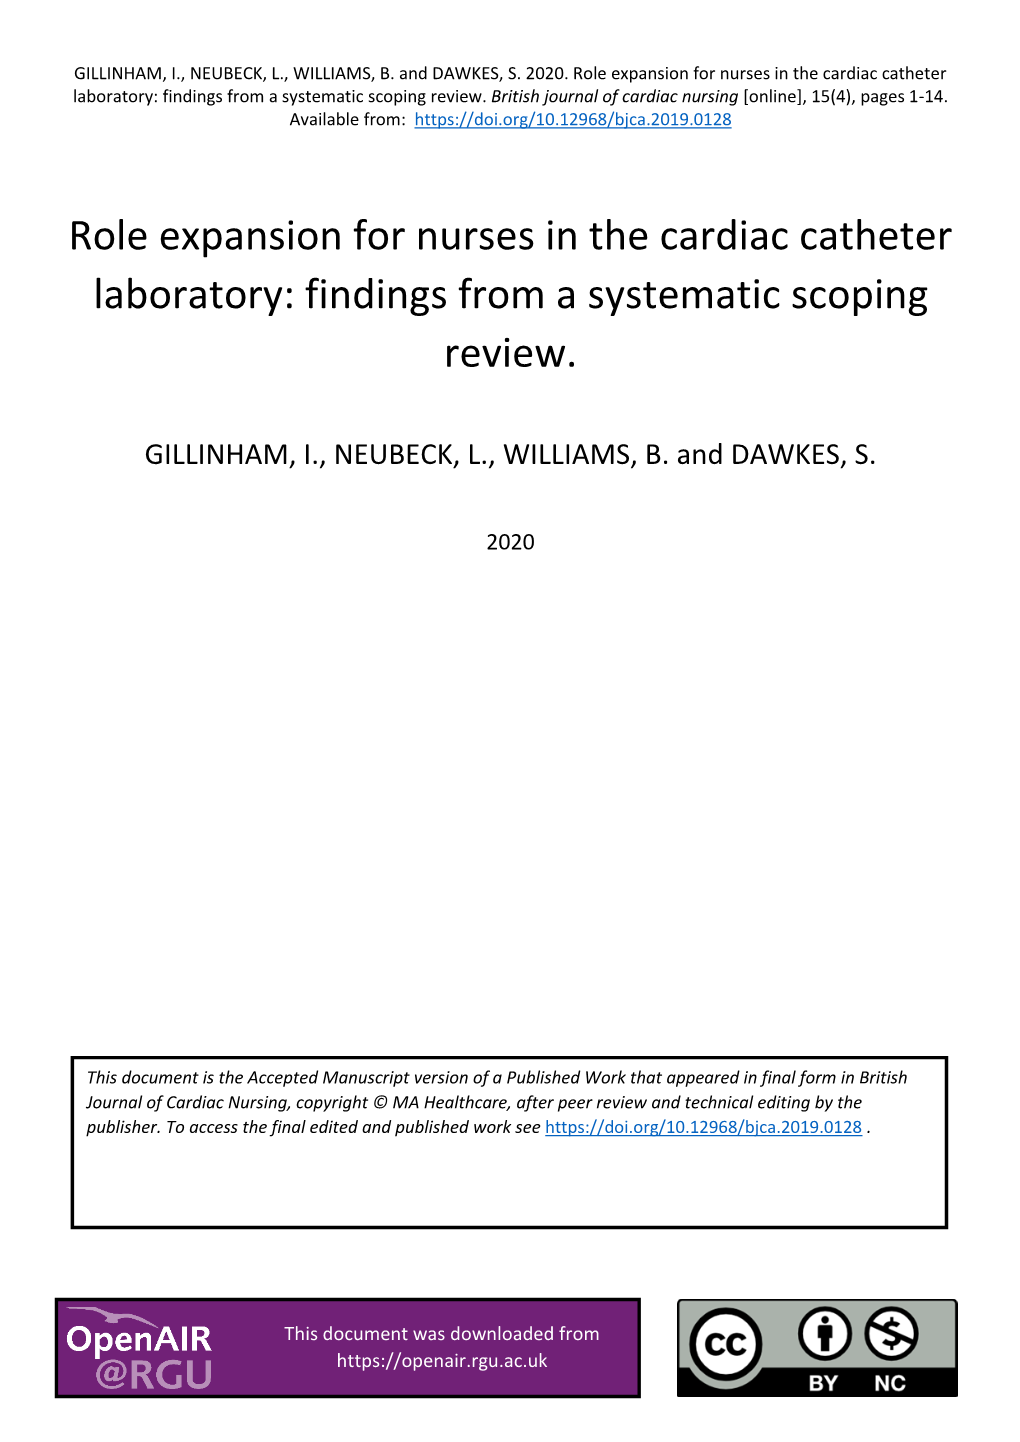 Role Expansion for Nurses in the Cardiac Catheter Laboratory: Findings from a Systematic Scoping Review